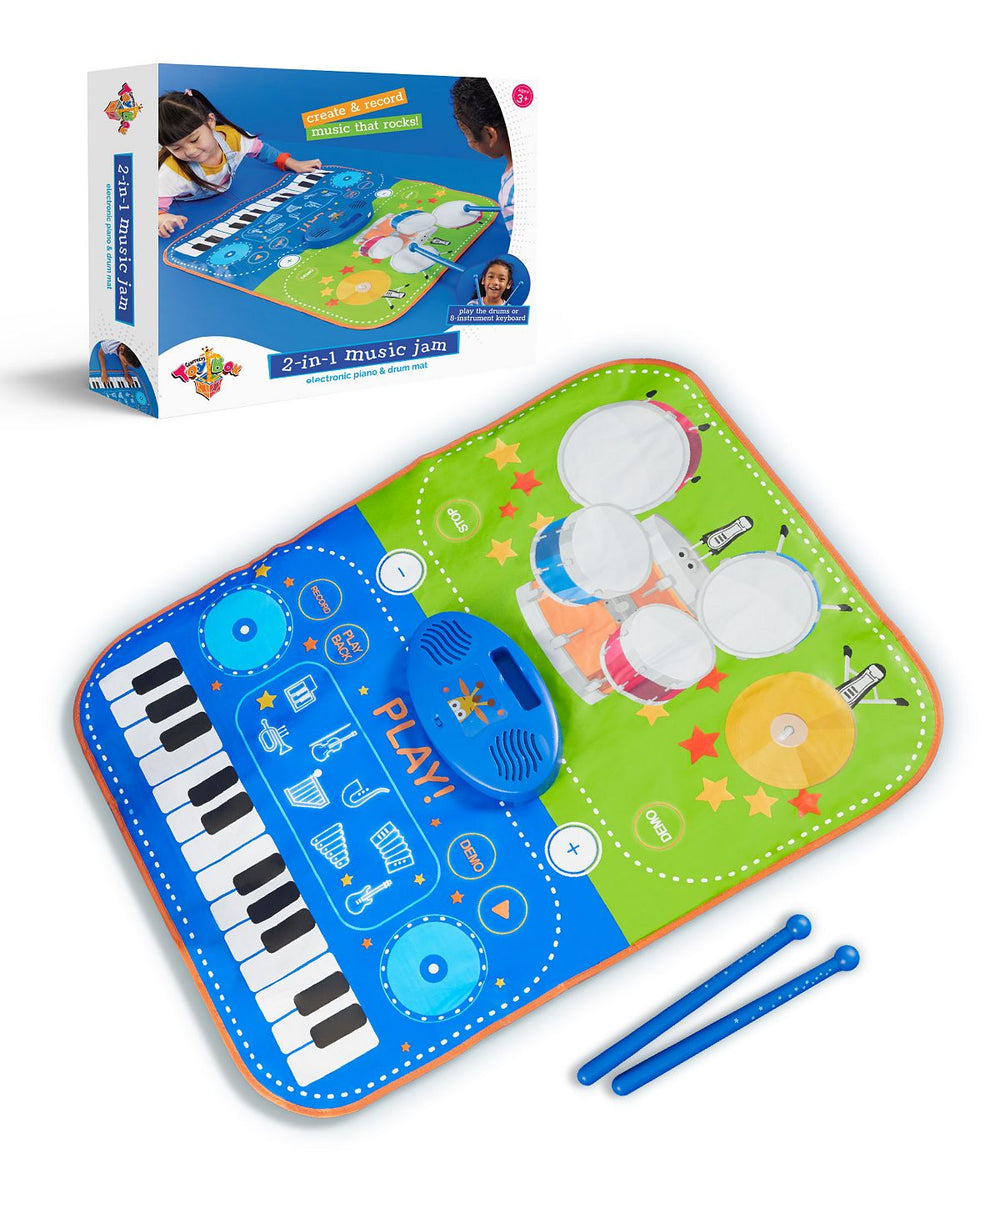 Geoffrey's Toy Box 2-in-1 Electronic Piano and Drum Mat, 3-Piece Set